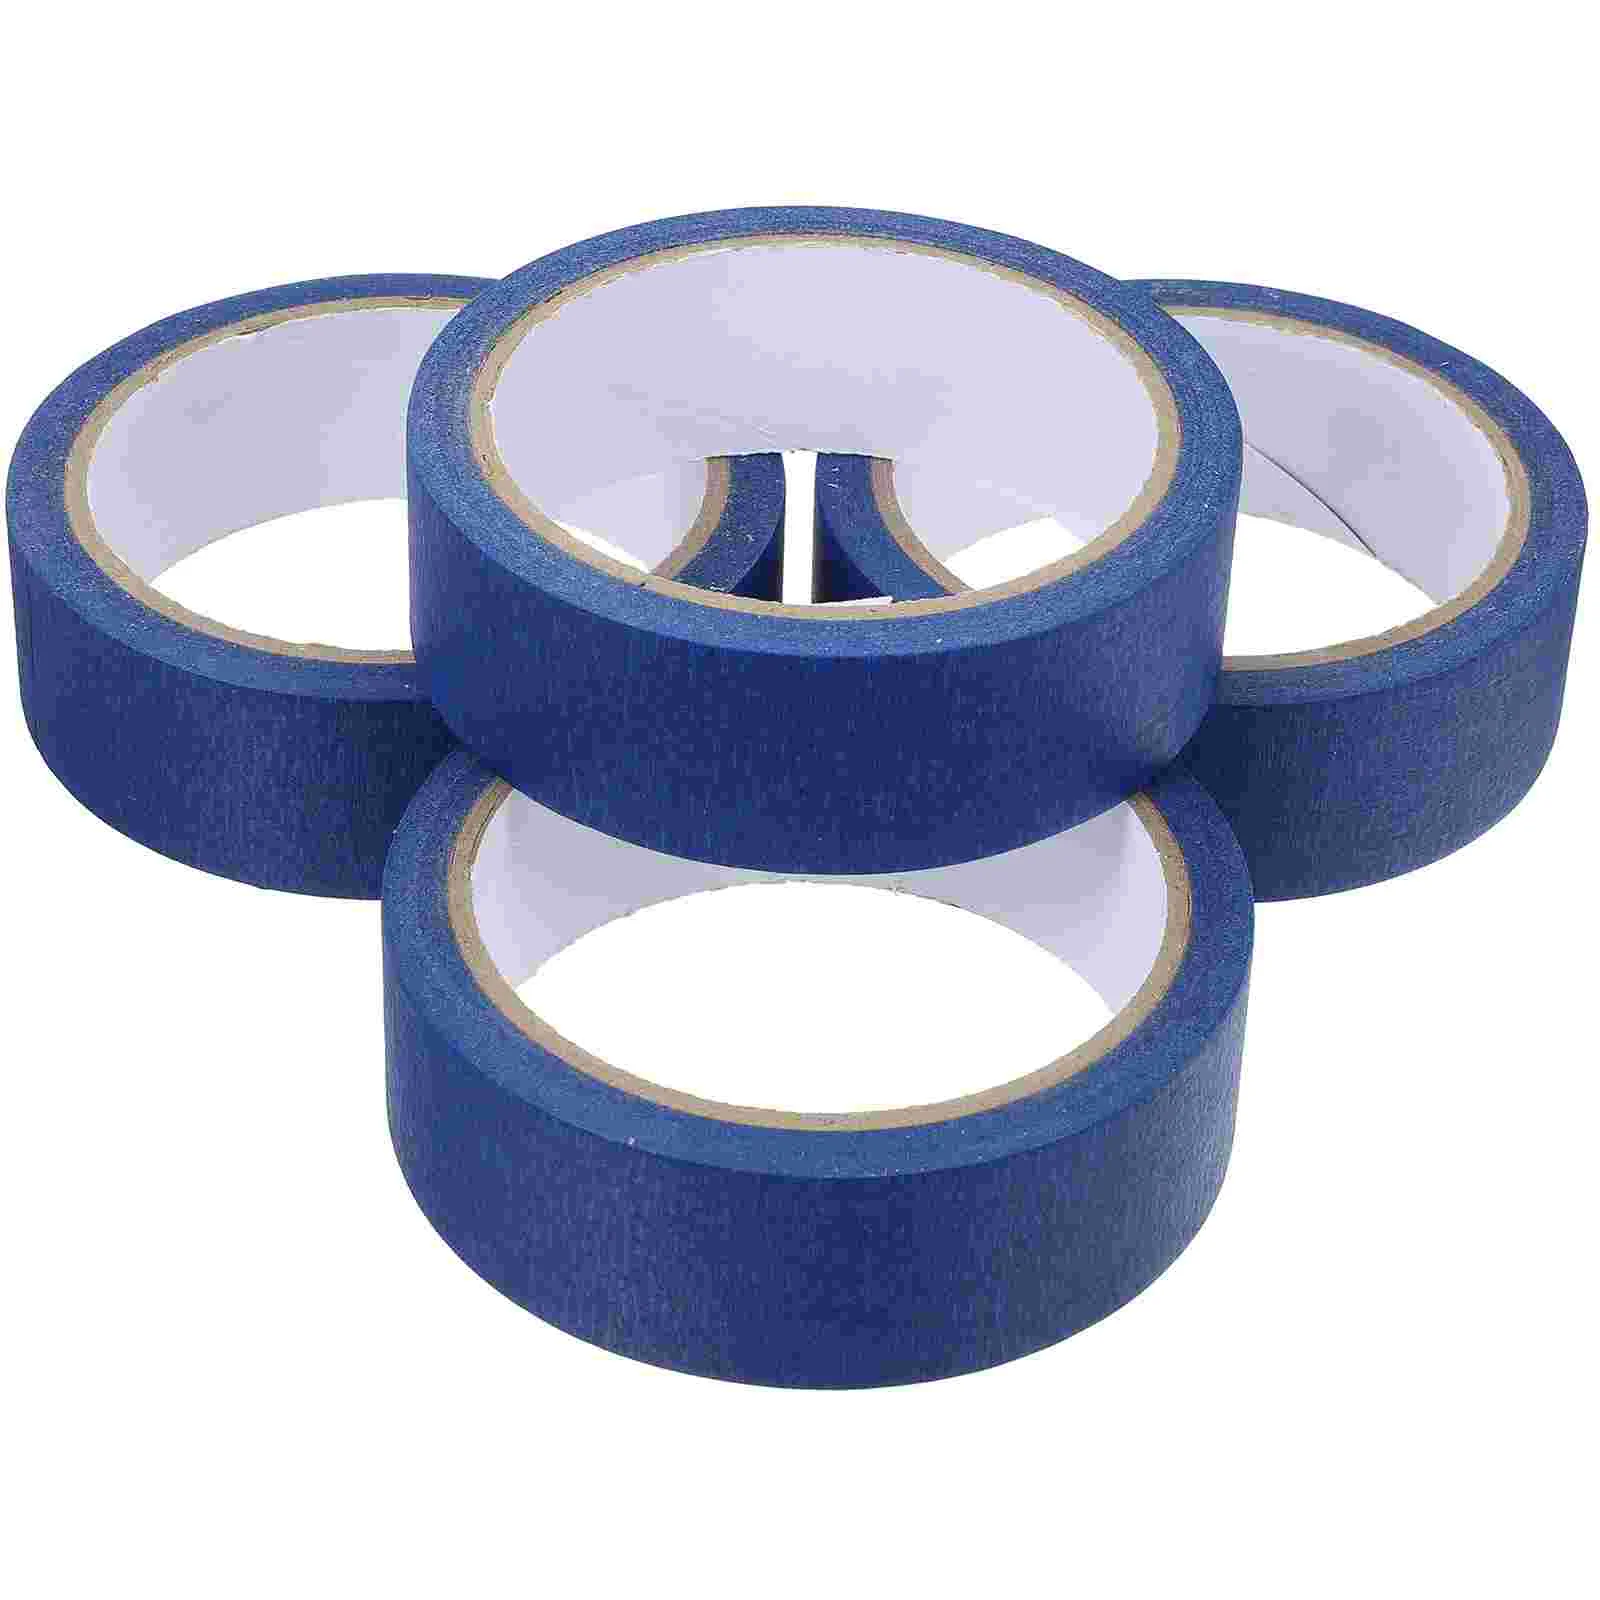 Blue Masking Tape DIY Tapes Crafts Adhesive Paint for Painting Painter Duct 1x 5m colorful grid washi tape hobbyhouse paper diy planner masking tape adhesive tapes stickers decorative stationery tapes